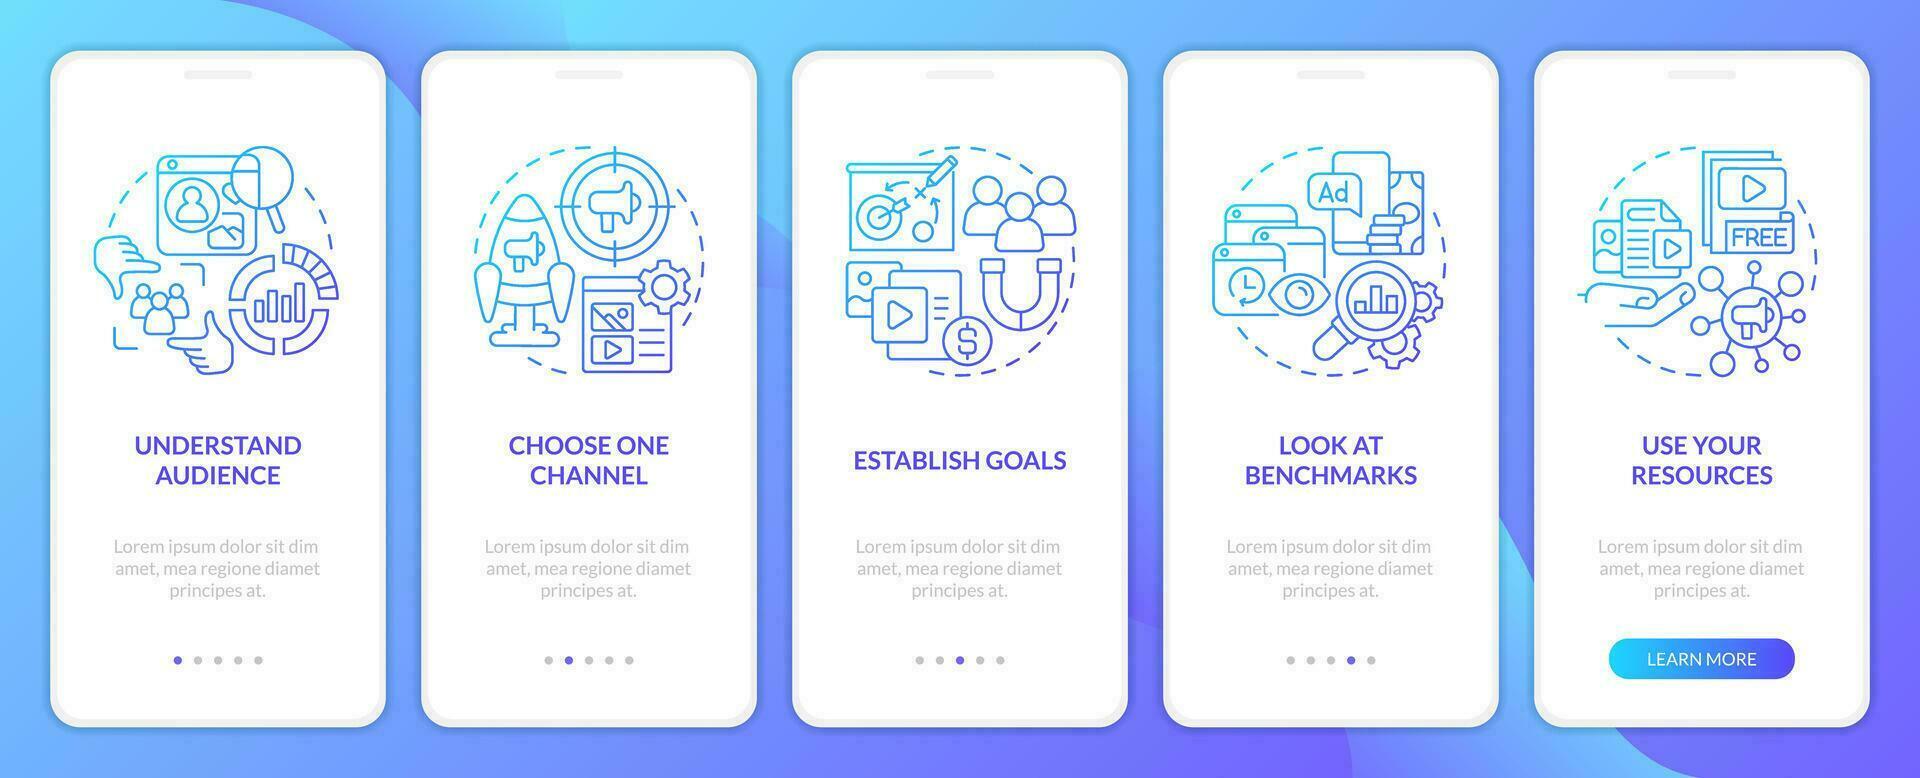 Start social media advertising blue gradient onboarding mobile app screen. Walkthrough 5 steps graphic instructions with linear concepts. UI, UX, GUI template vector